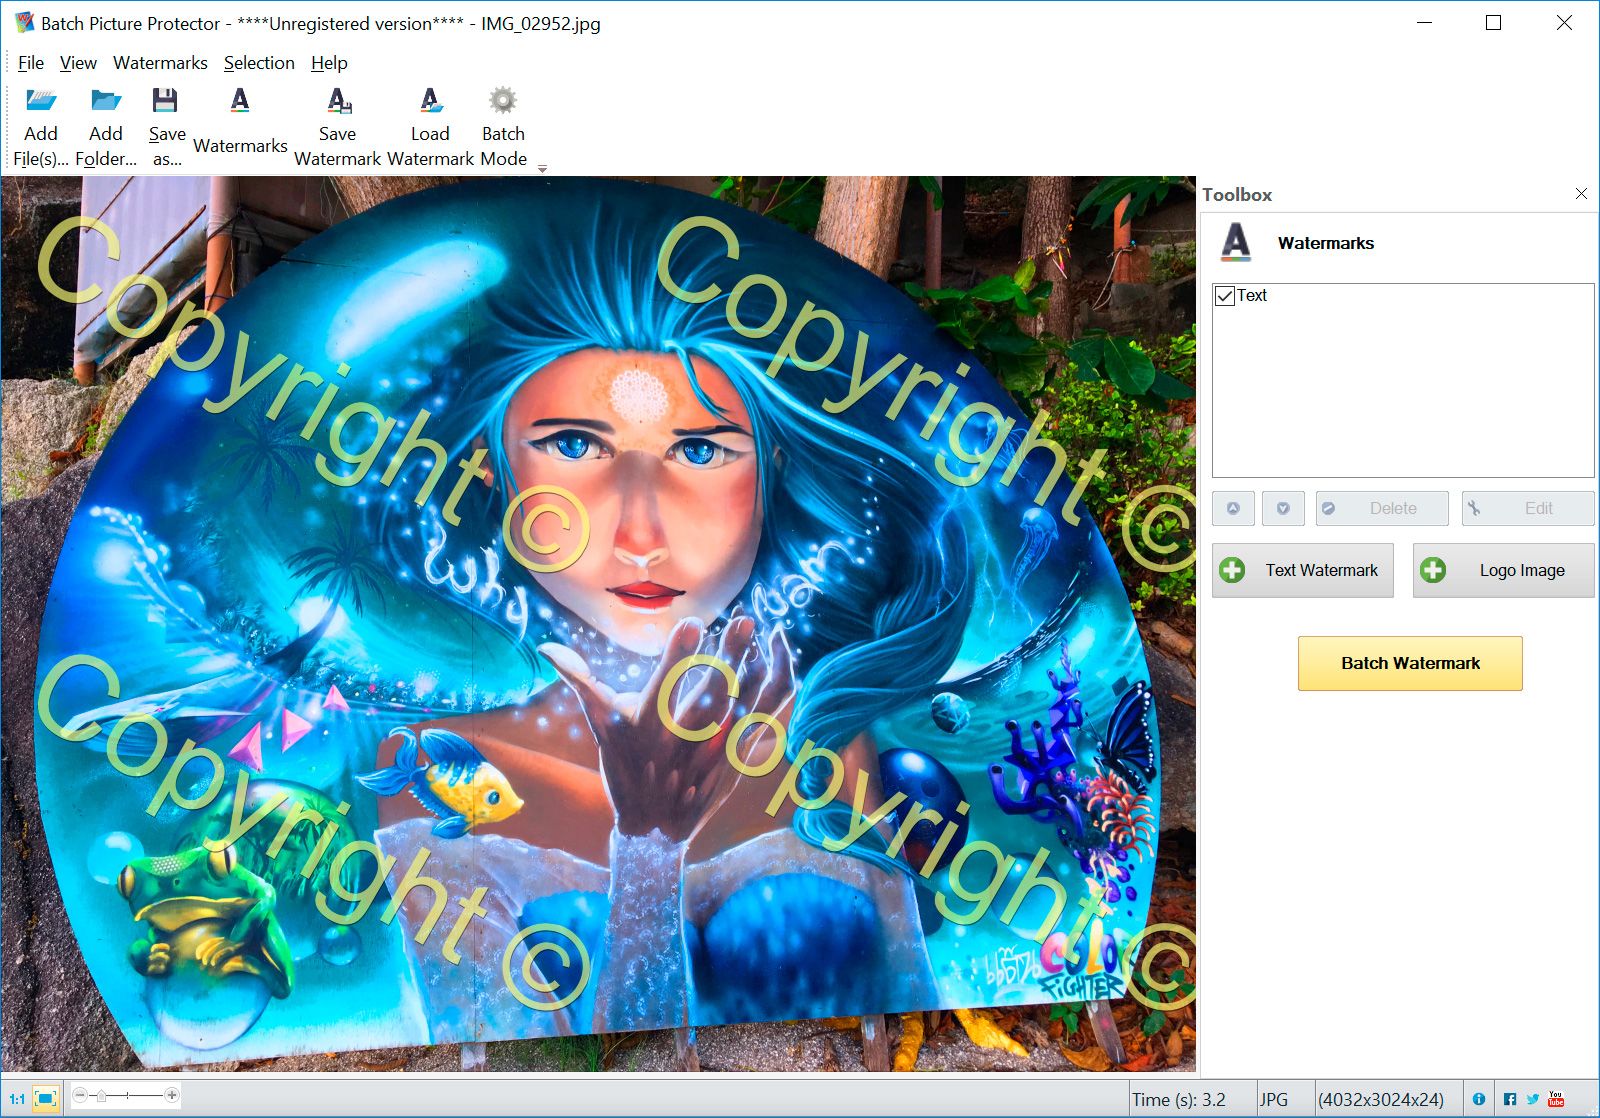 Windows 8 Batch Picture Protector full